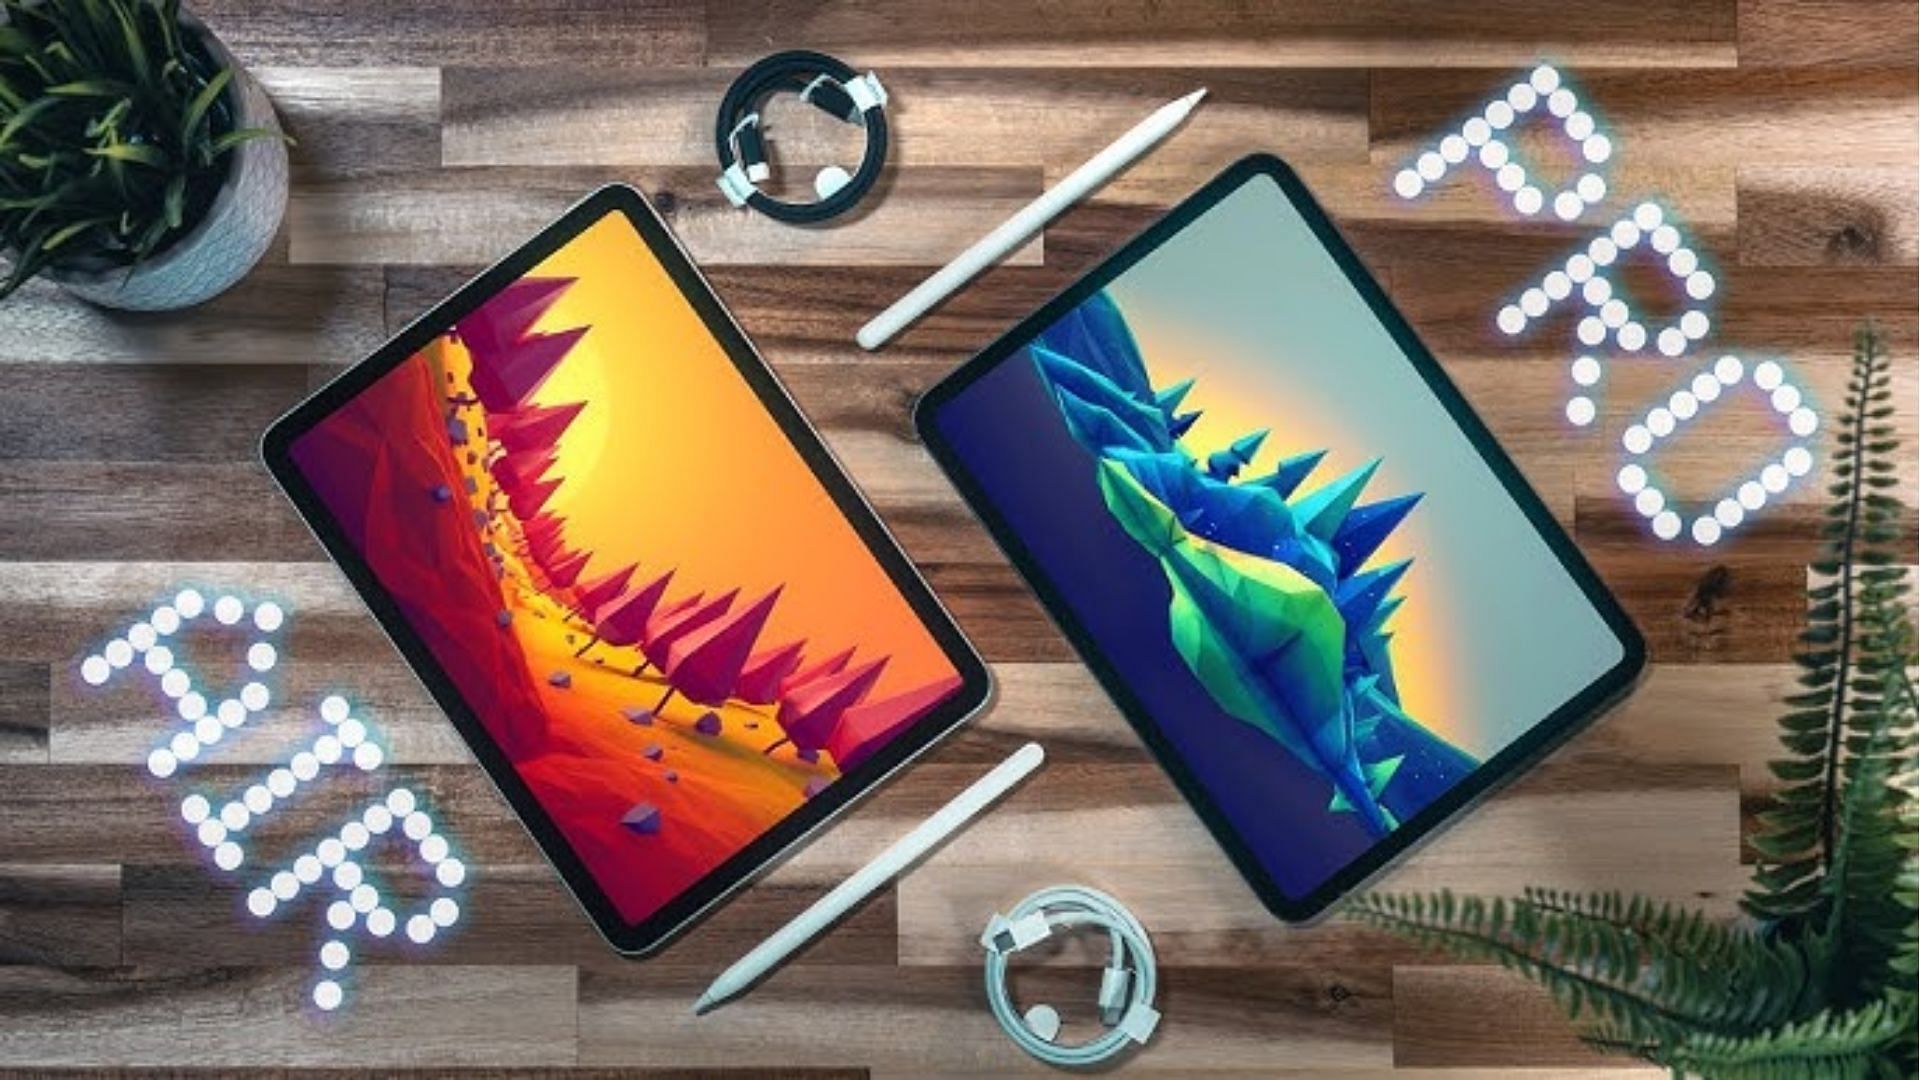 M2 iPad Air or M4 iPad Pro: Which one is a better pick? (Image via YouTube/FaizAly)